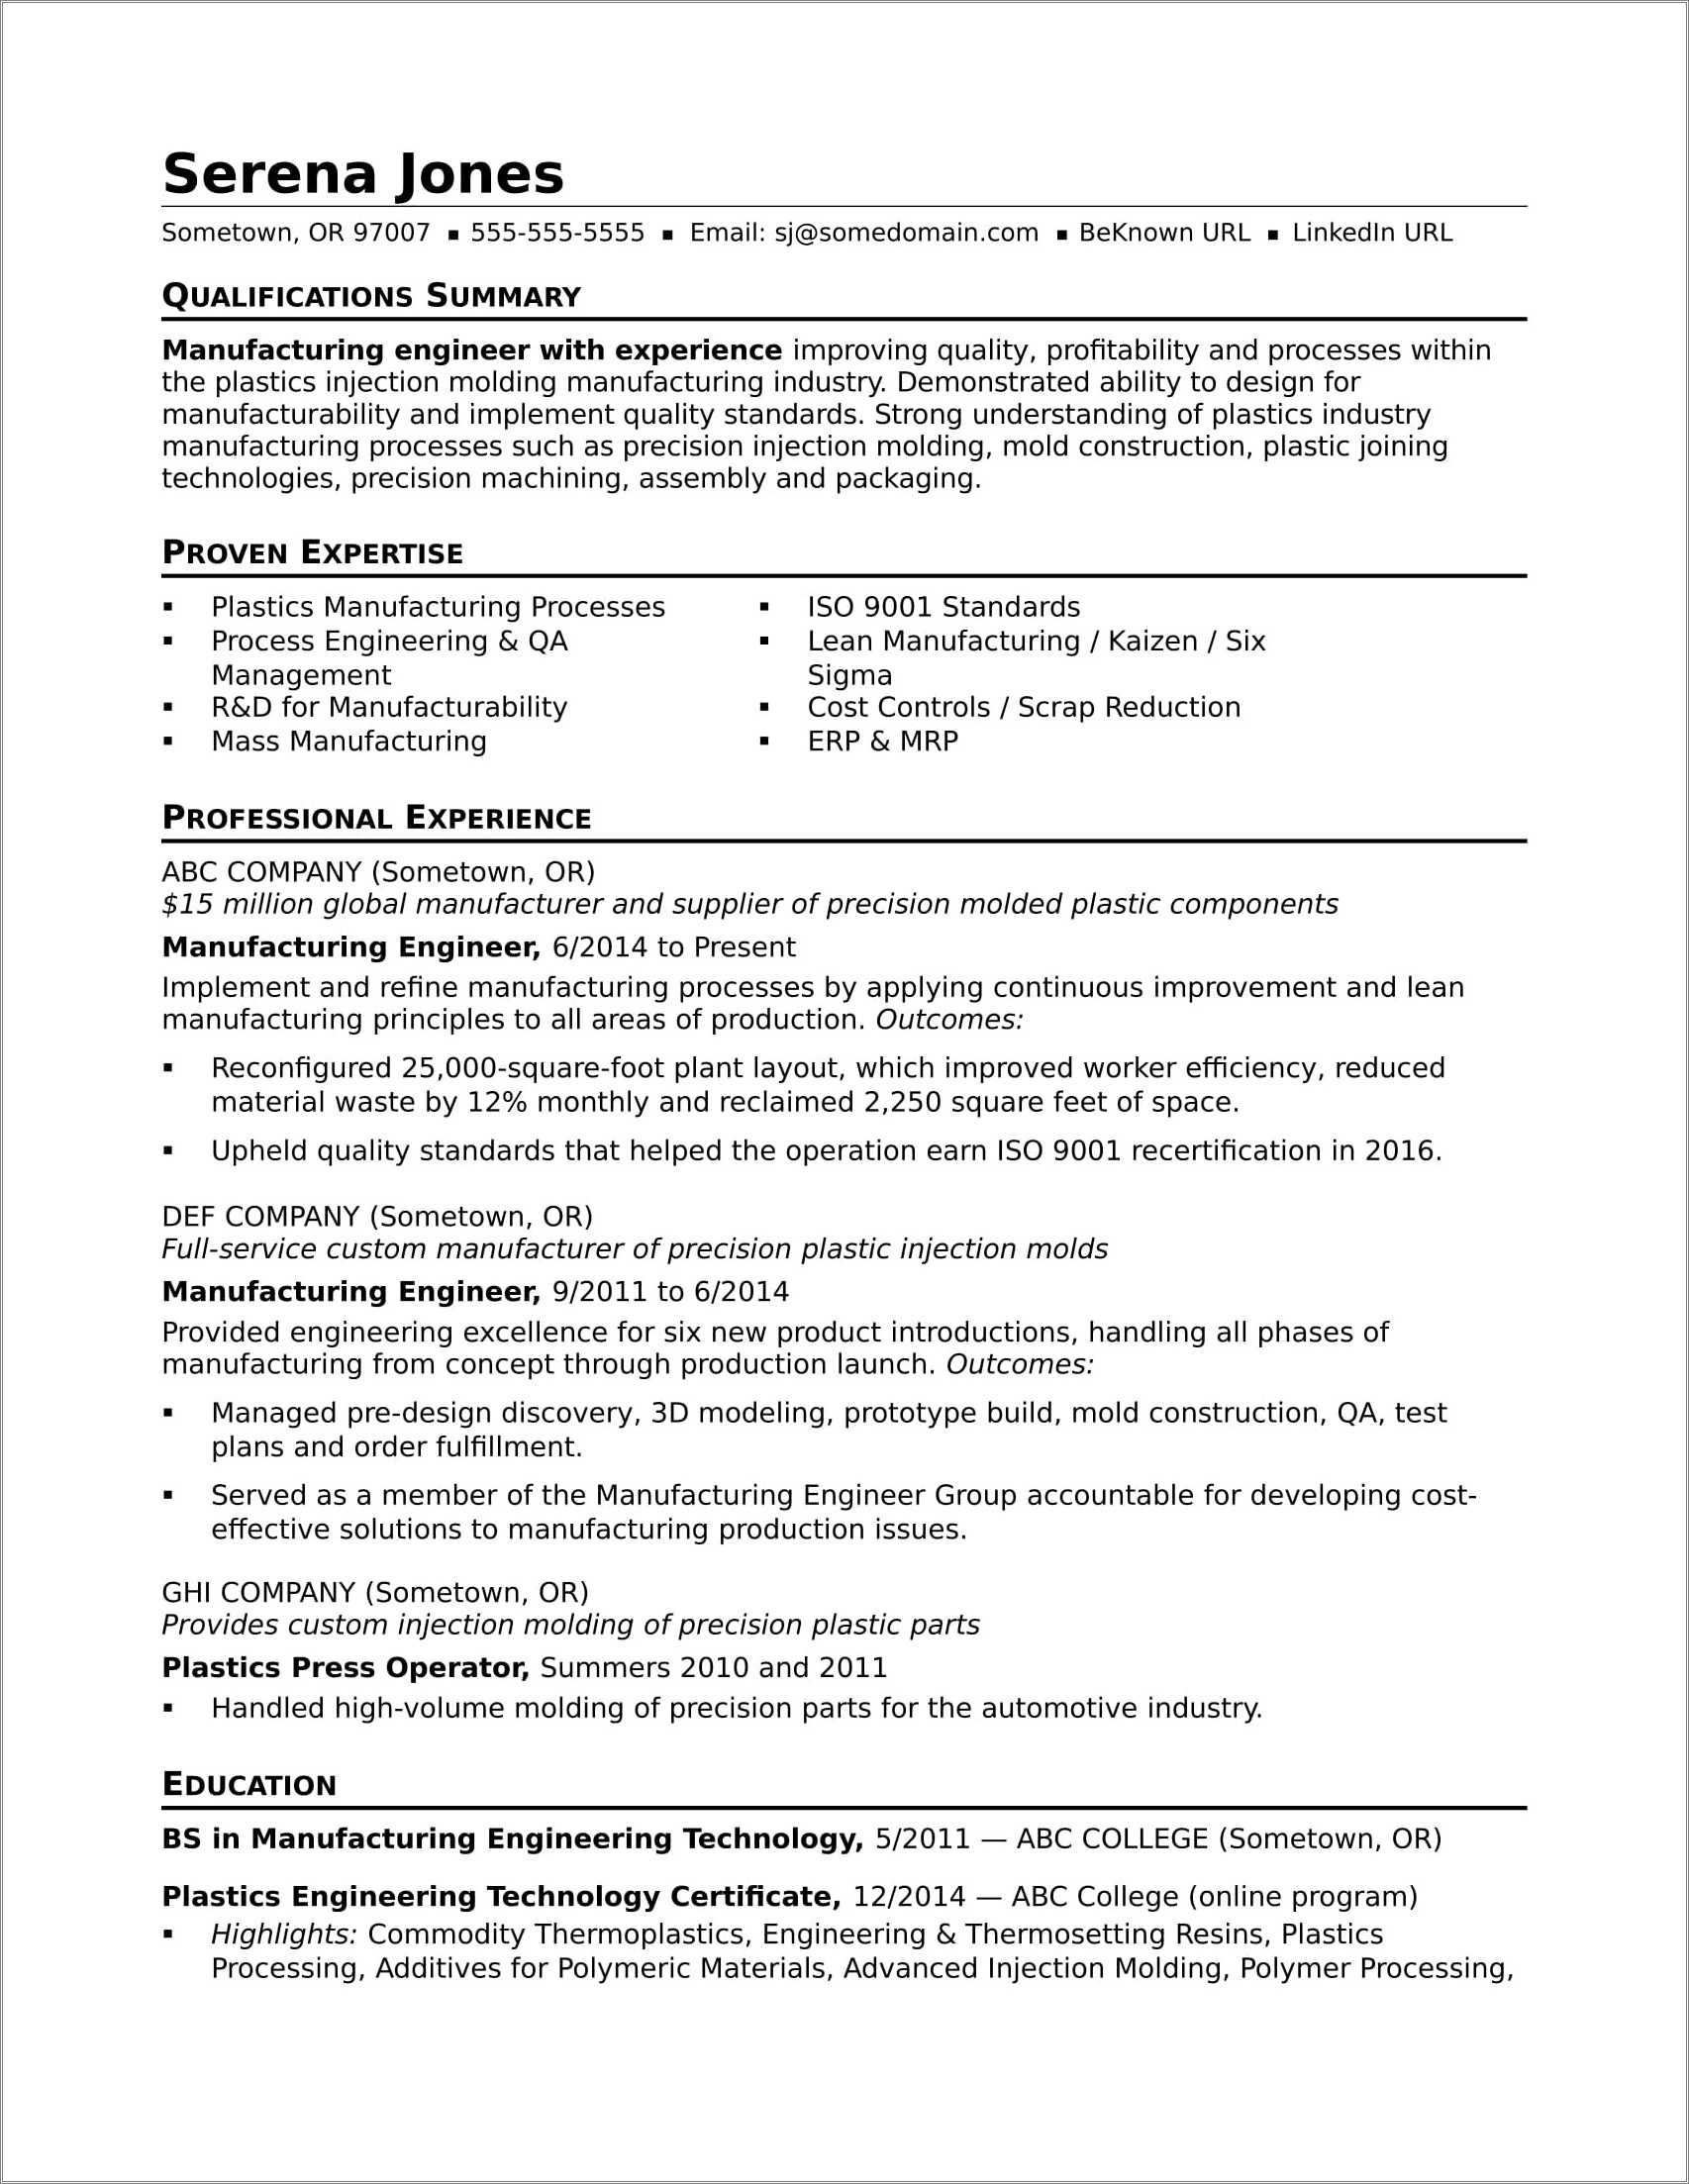 A Good Qualification Summary For A Resume